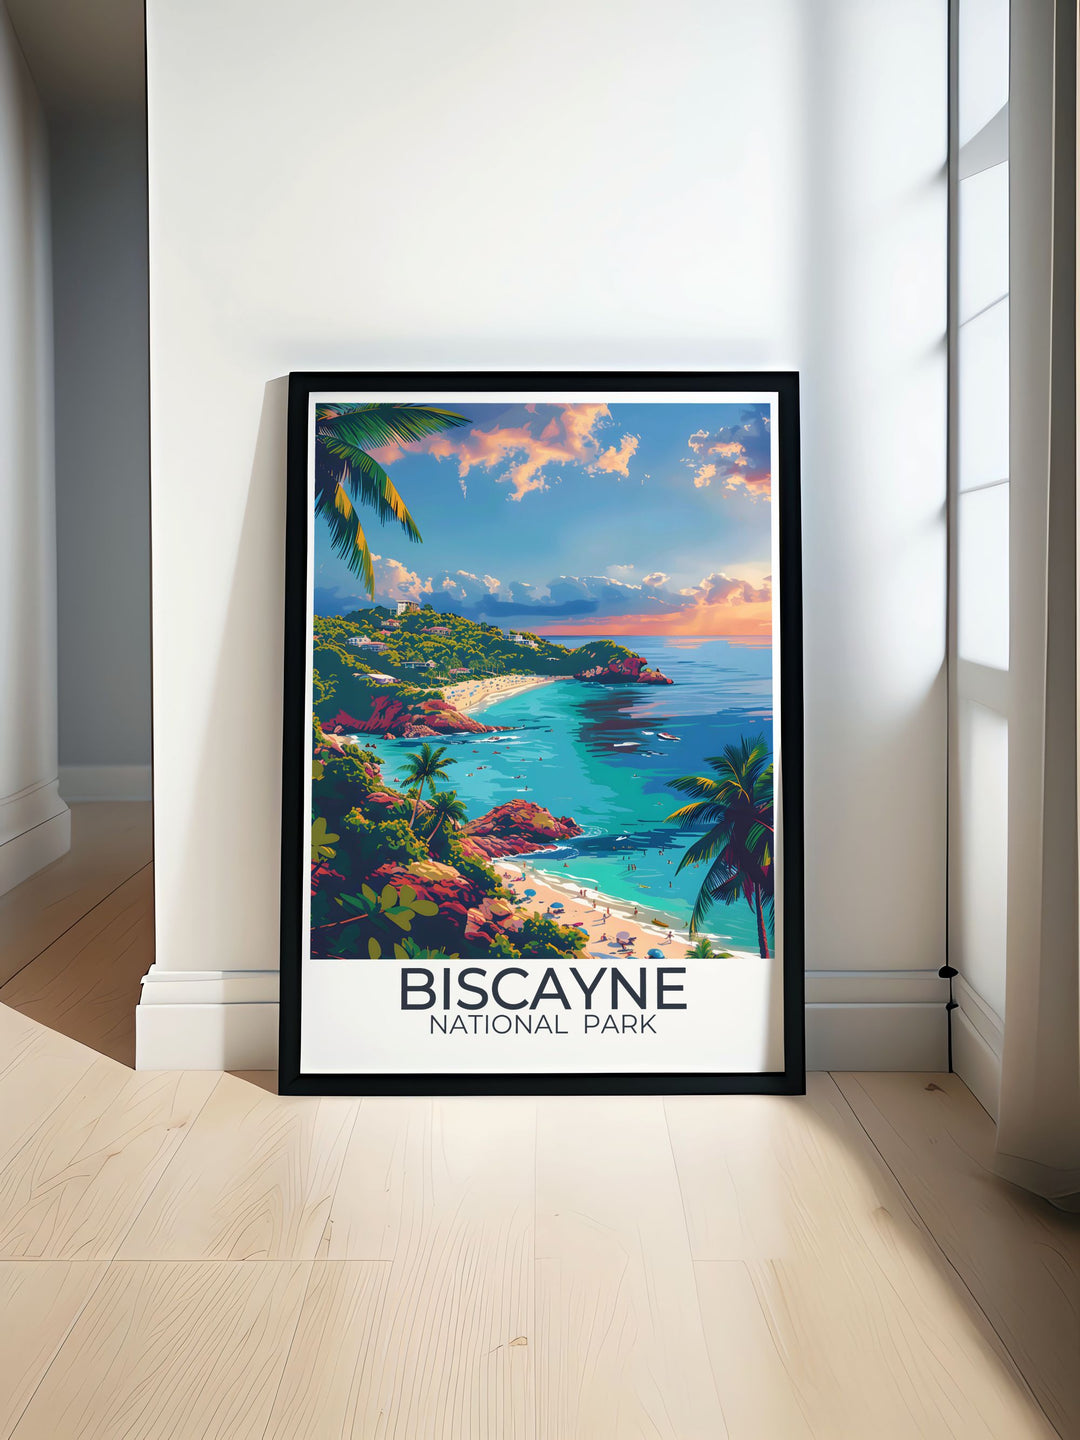 Captivating Biscayne National Park poster featuring the serene Elliot Key Trail and vibrant coral reefs, showcasing the parks natural beauty and charm. Perfect for adding a touch of outdoor elegance to your home decor.